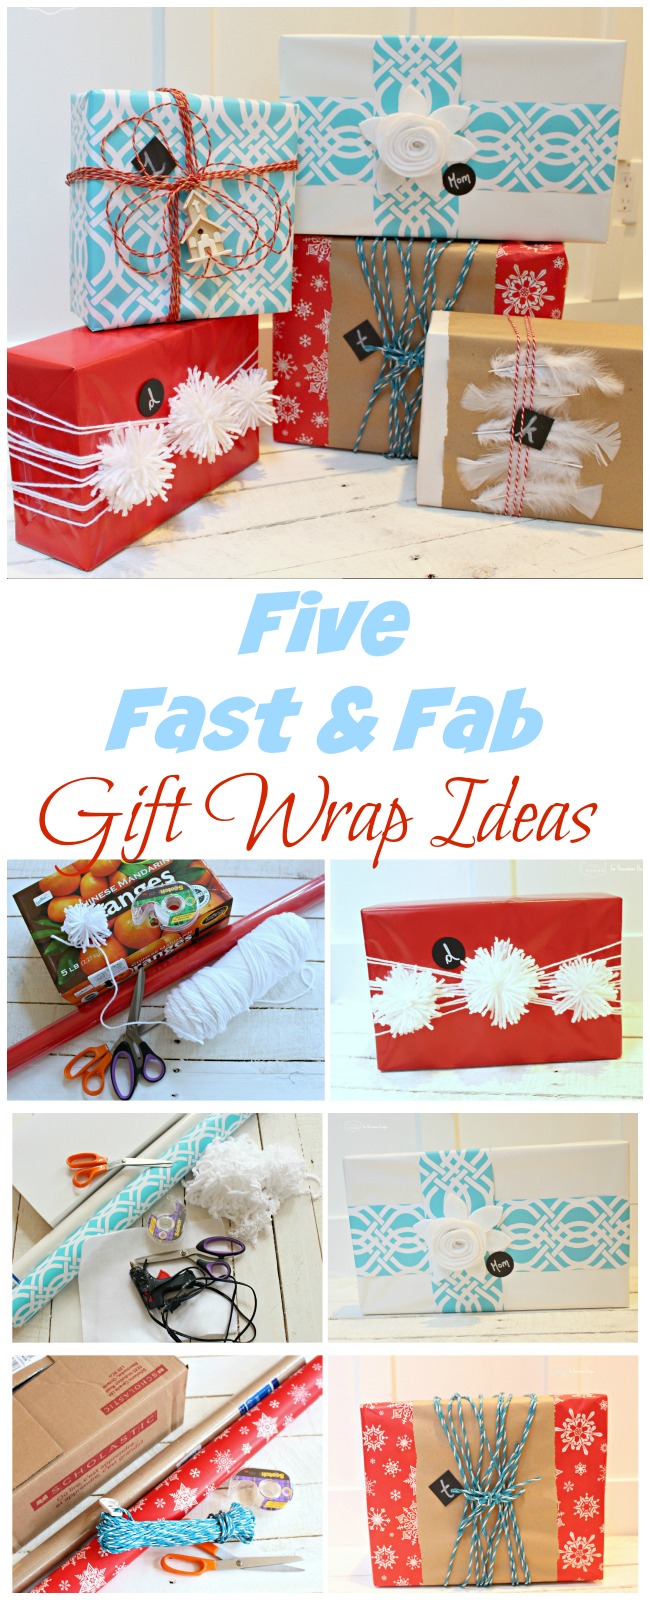 Five Fast and Fab Gift Wrap Ideas at The Happy Housie how to